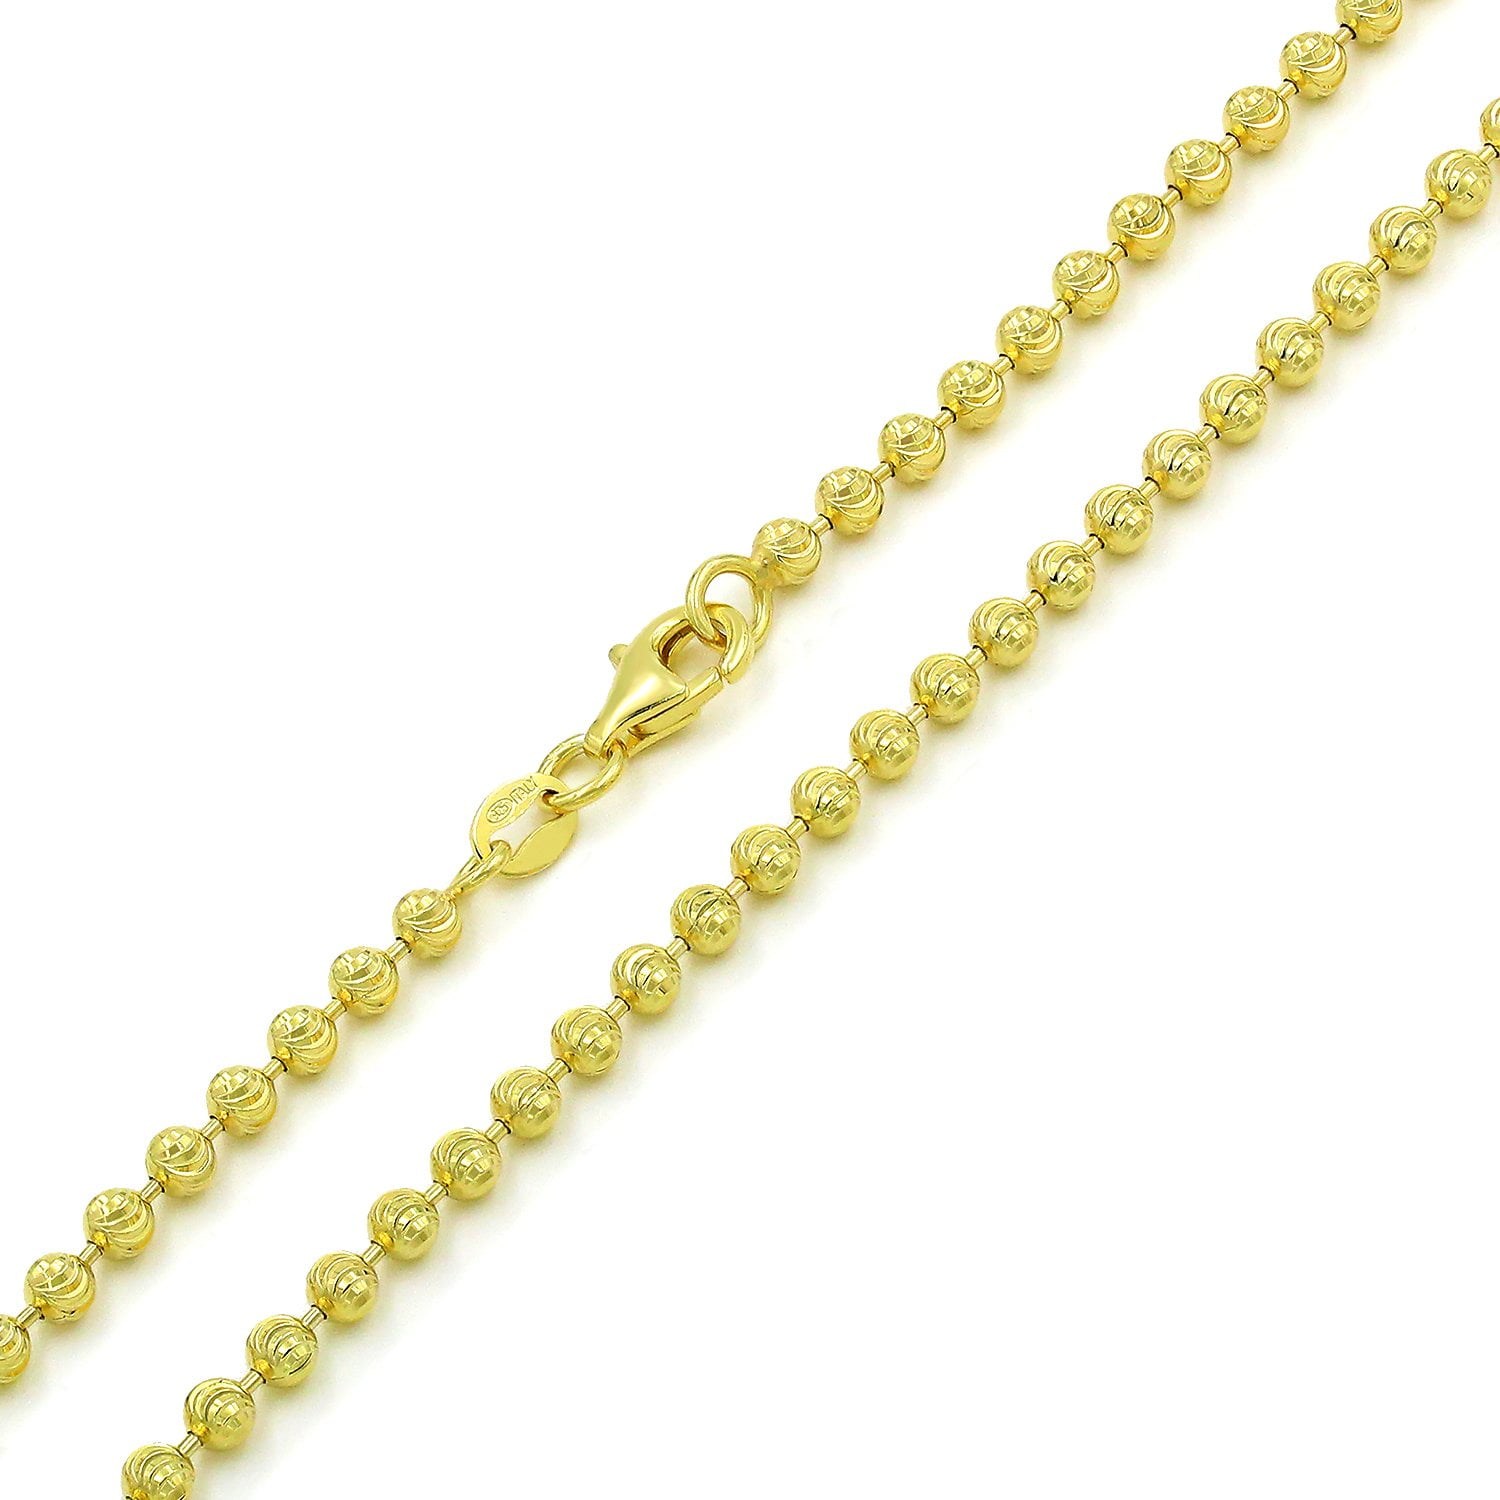 2.3mm Franco Solid Chain Necklace 14K Yellow Gold Clad Sterling Silver 925 ITALY 